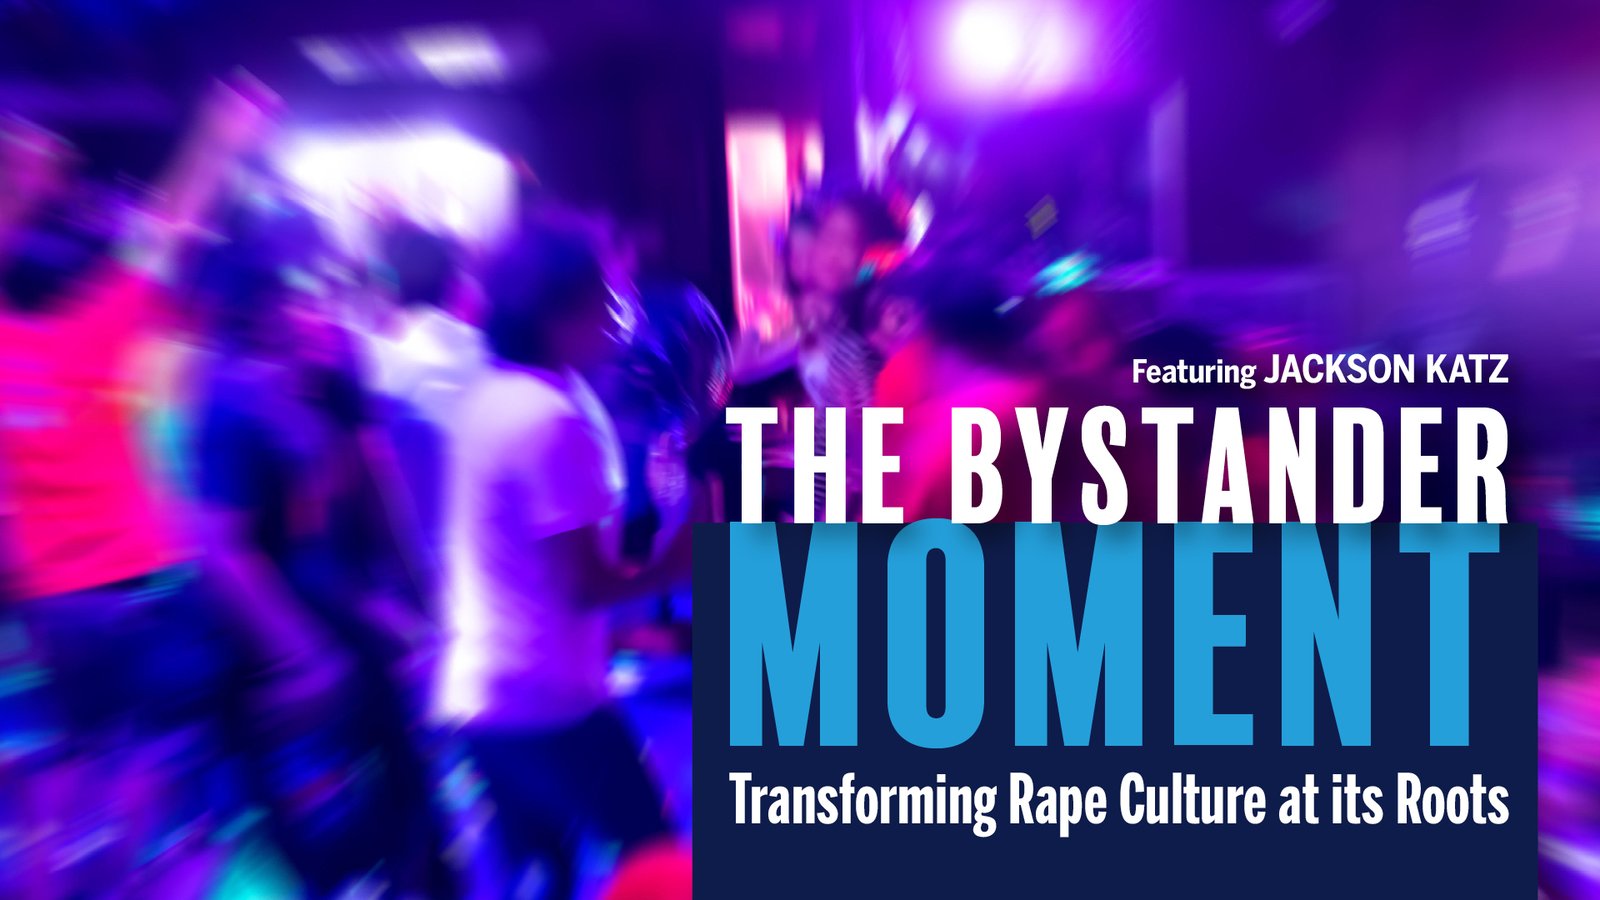 The Bystander Moment - Transforming Rape Culture at Its Roots